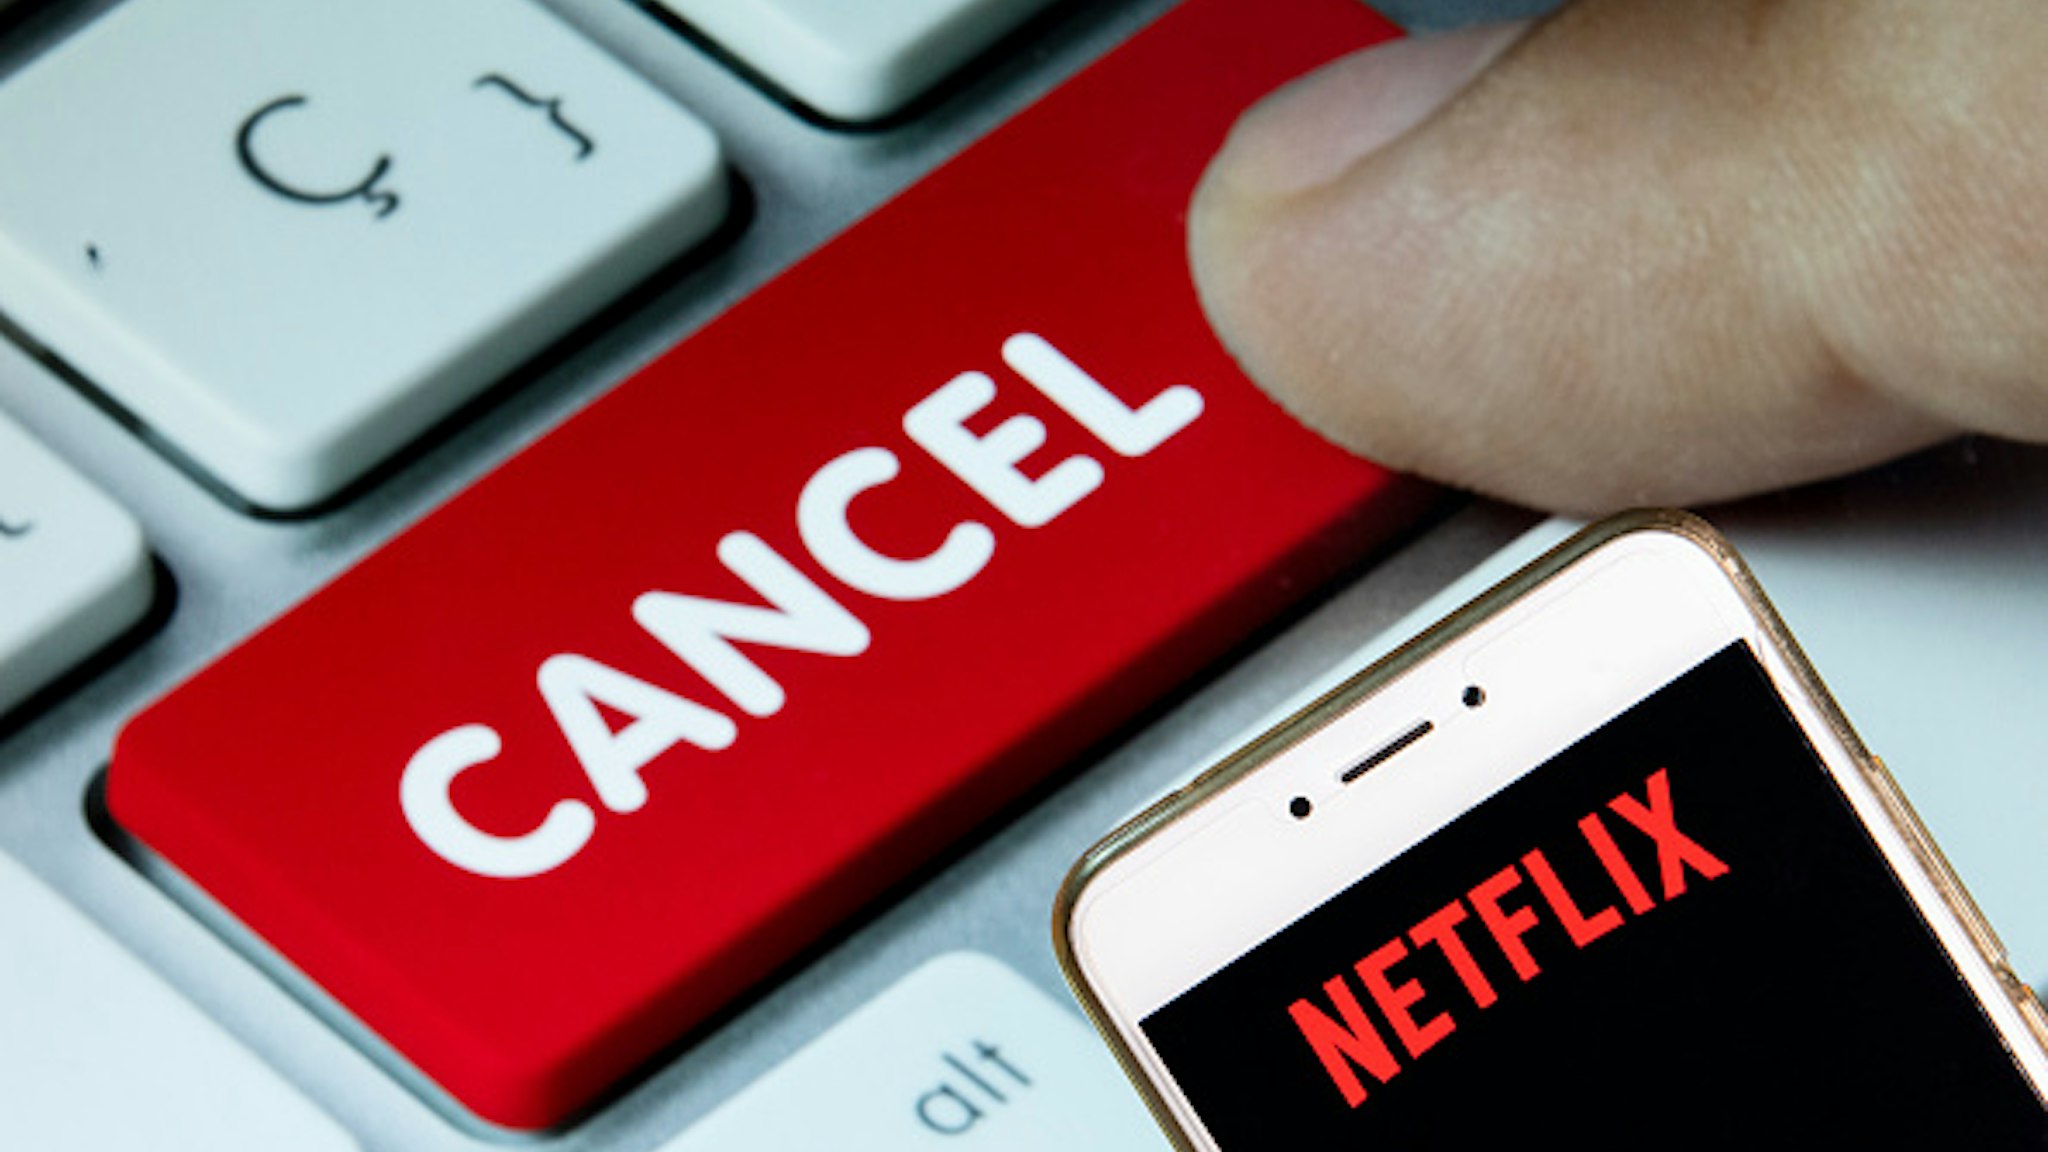 HONG KONG - 2018/12/02: In this photo illustration, the American global on-demand Internet streaming media provider Netflix logo is seen displayed on an Android mobile device with a computer key which says cancel.